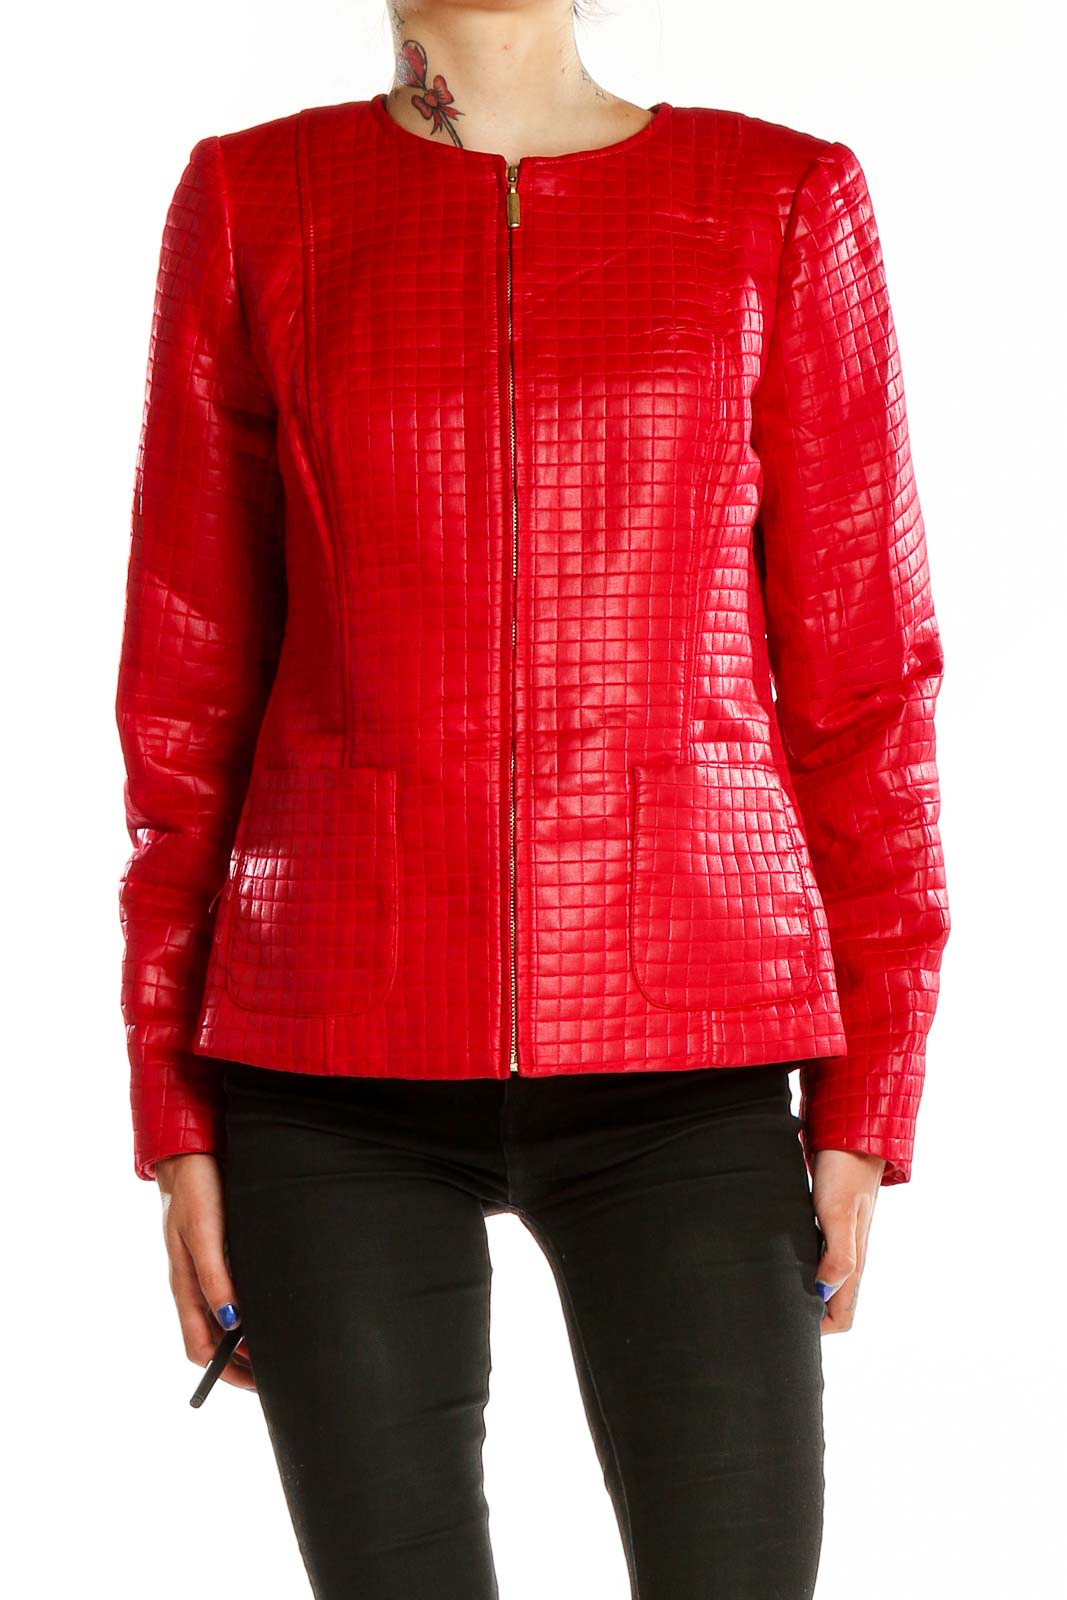 Red Retro Textured Jacket Front